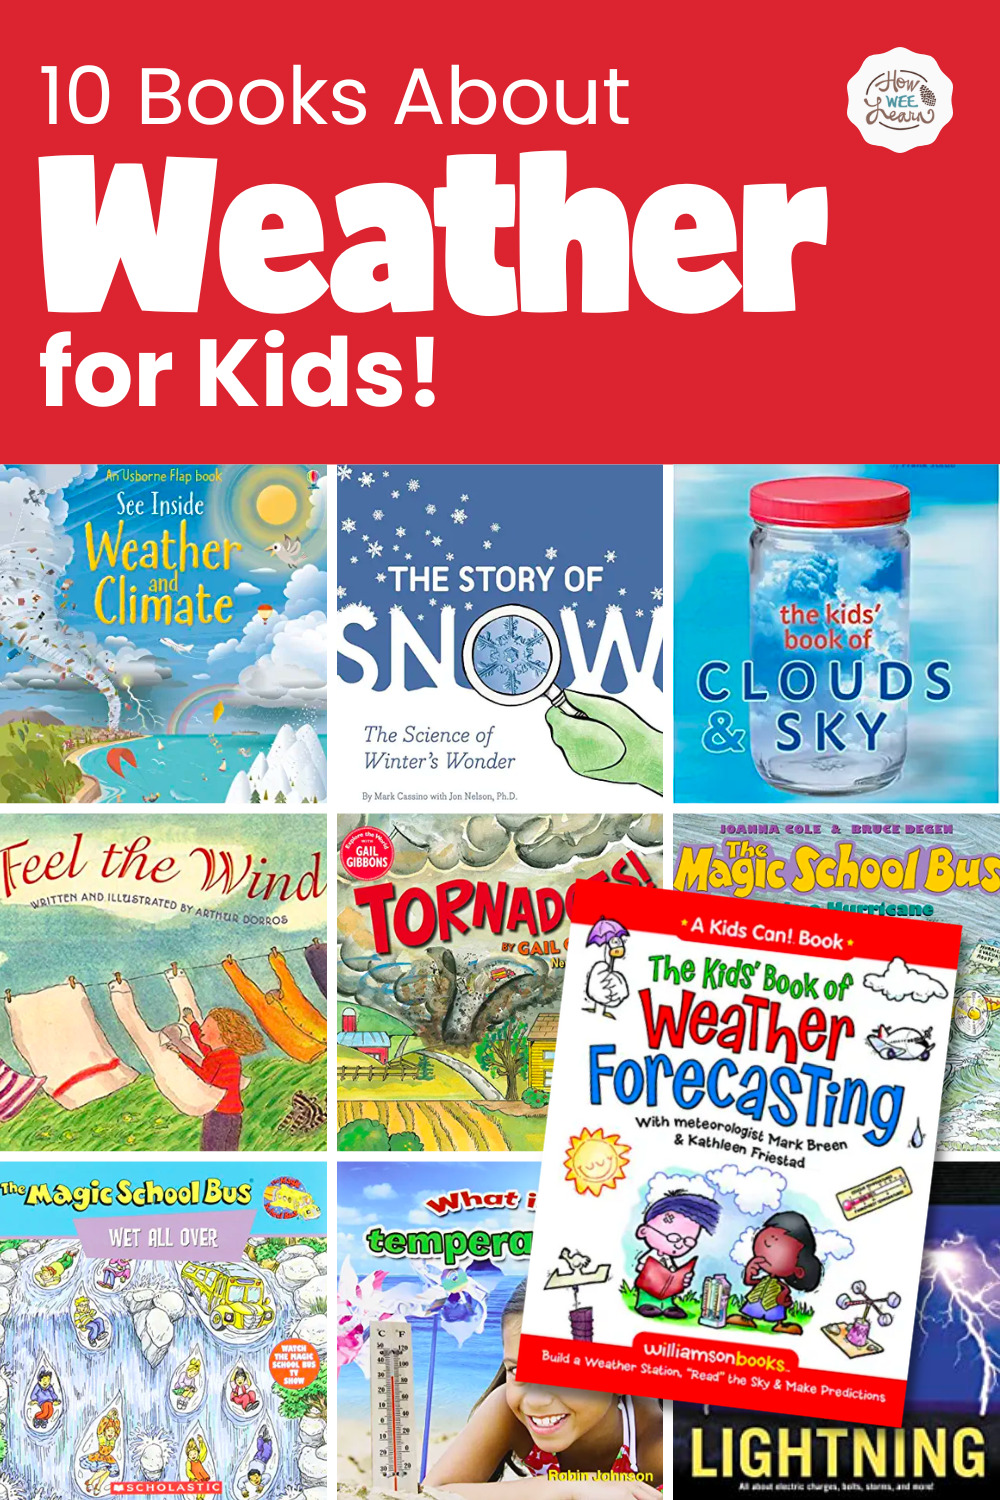 10 Children's Books About Weather